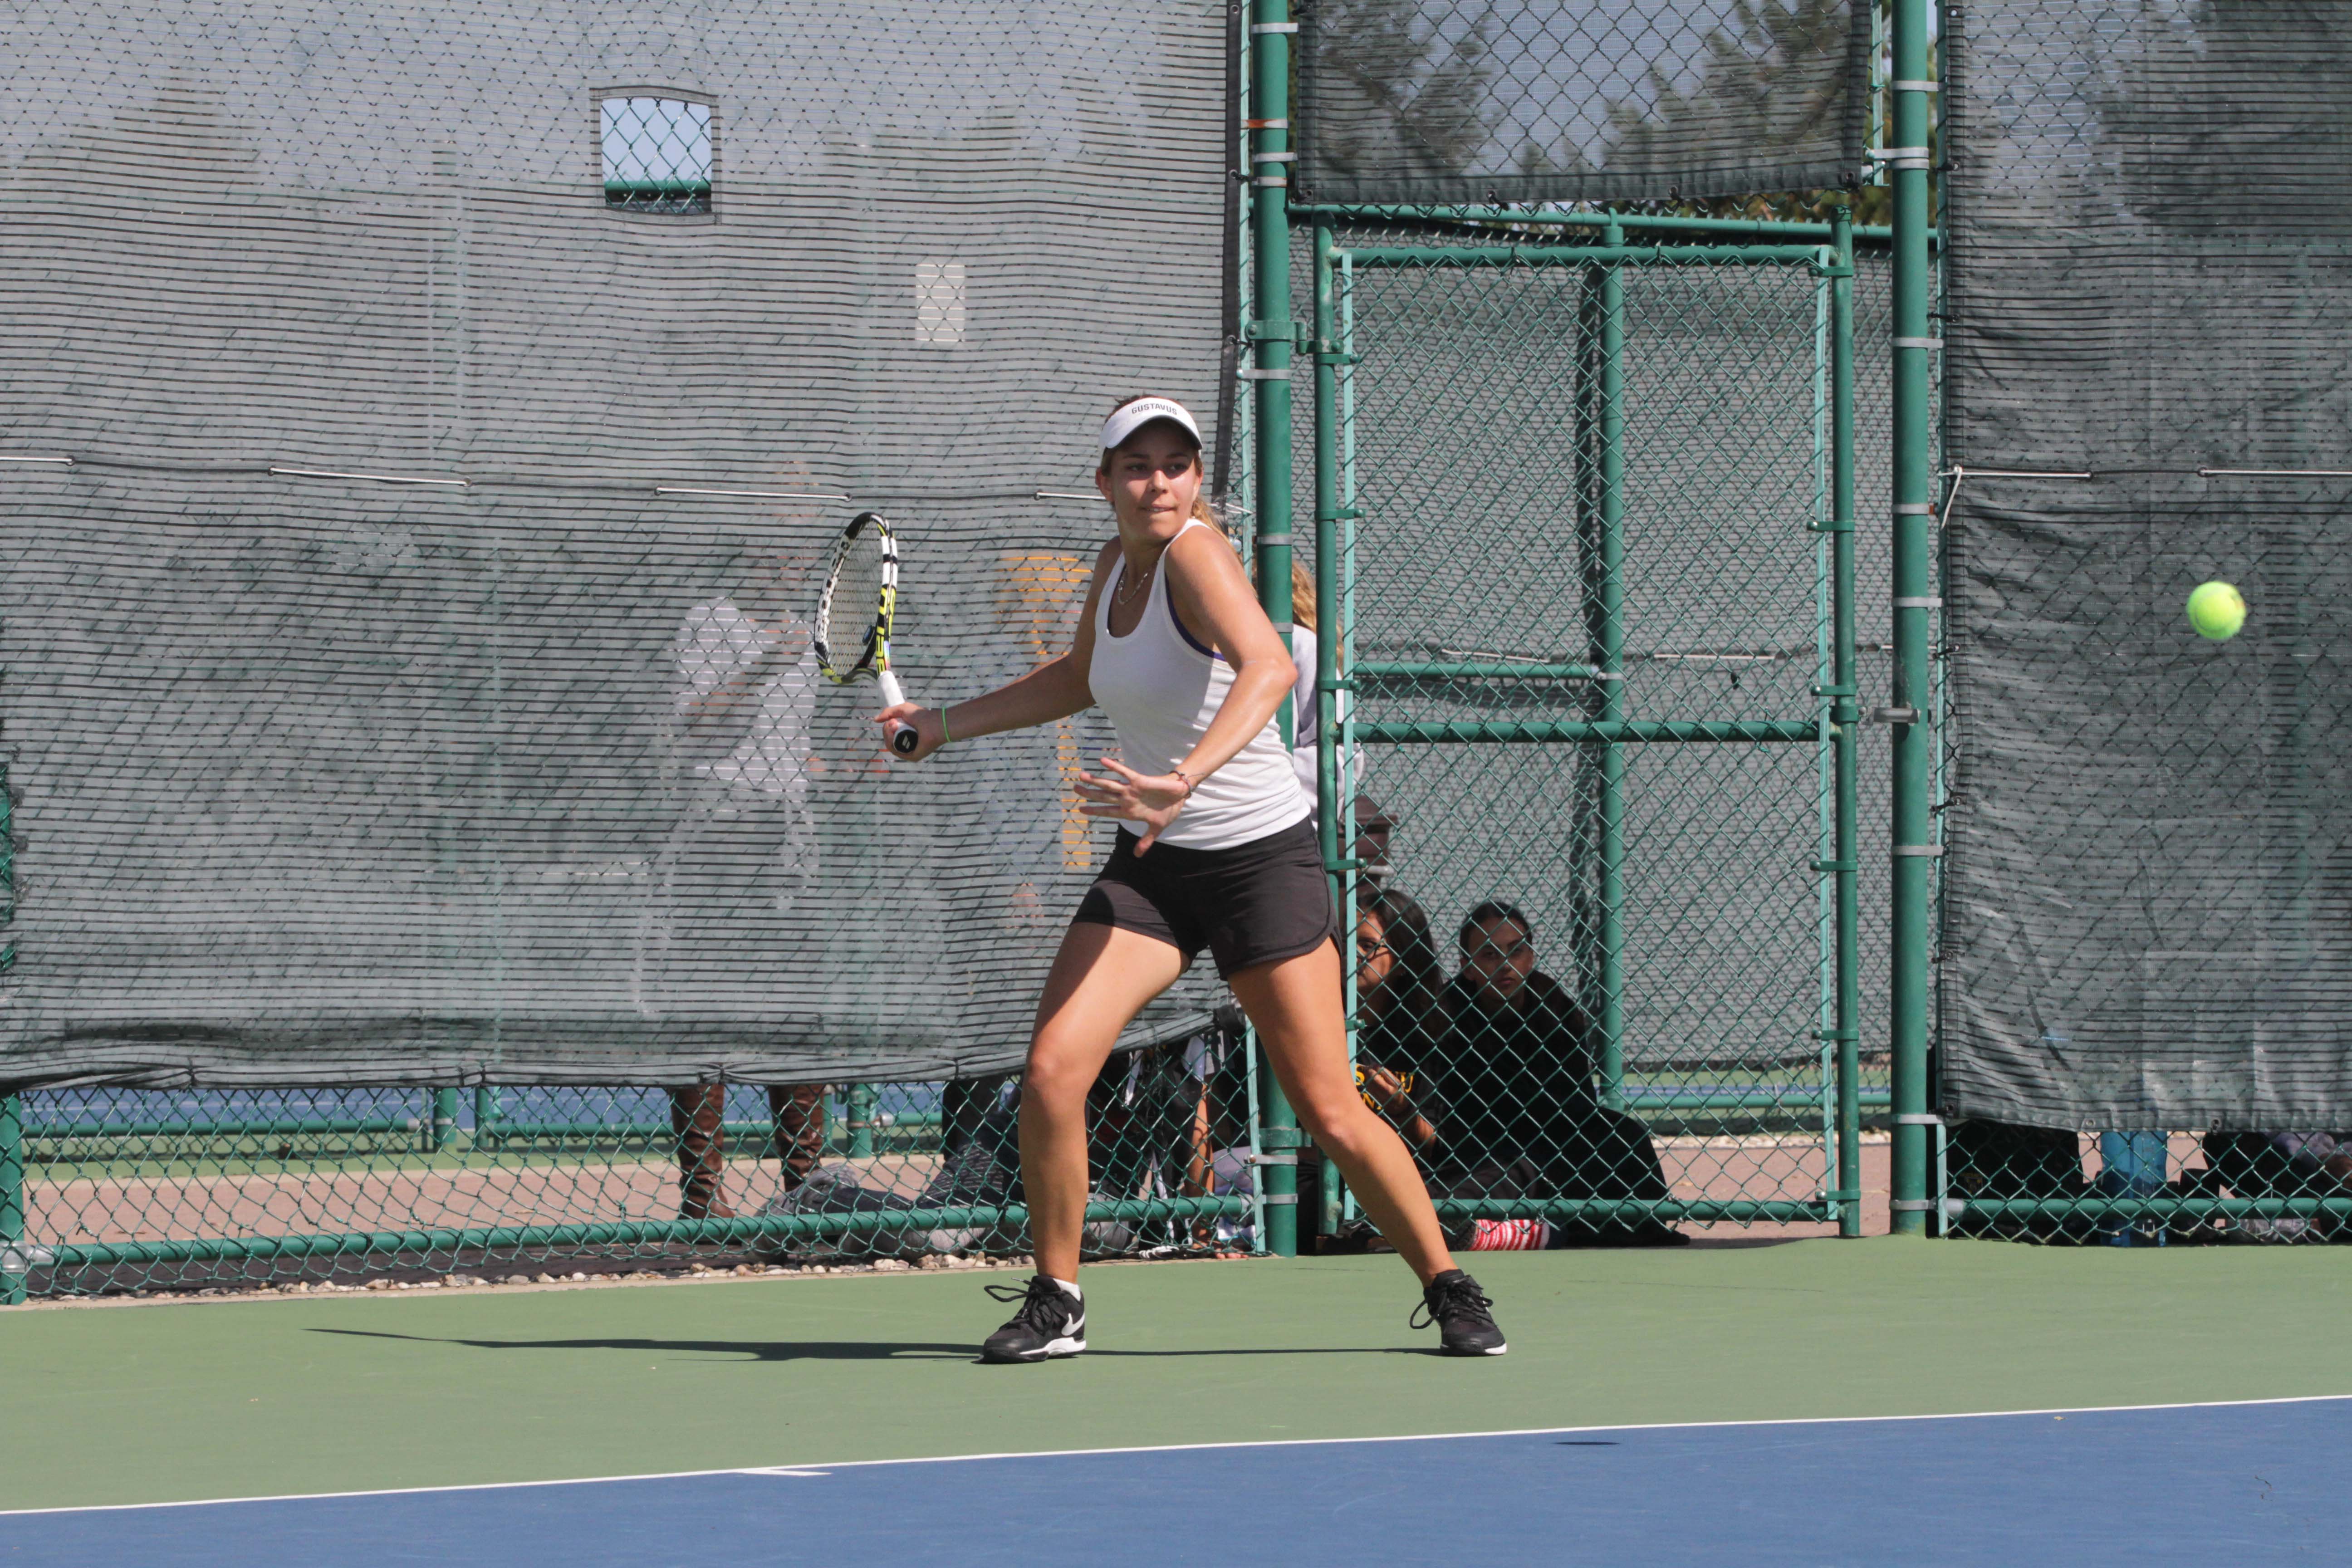 Sophomore Ginger Valentine competes at the Swanson Tennis Center Sept. 23. Valentine earned All-American status this past weekend by winning the Midwest Regional Championship match.